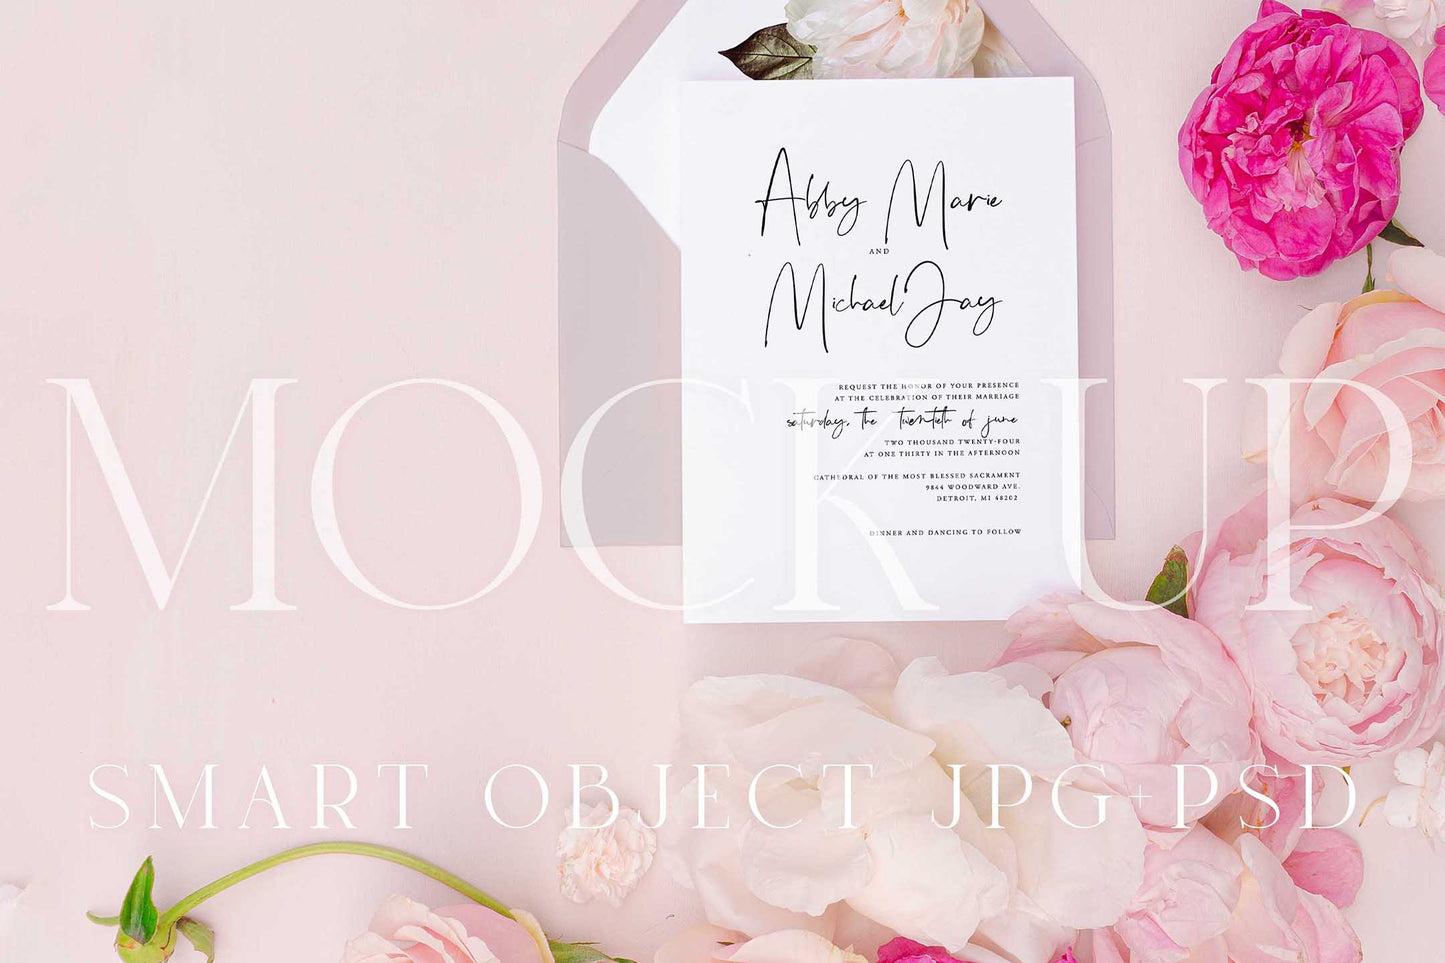 Invitation suite mock up, floral stationery mock up with peonies and roses {Berries 01}